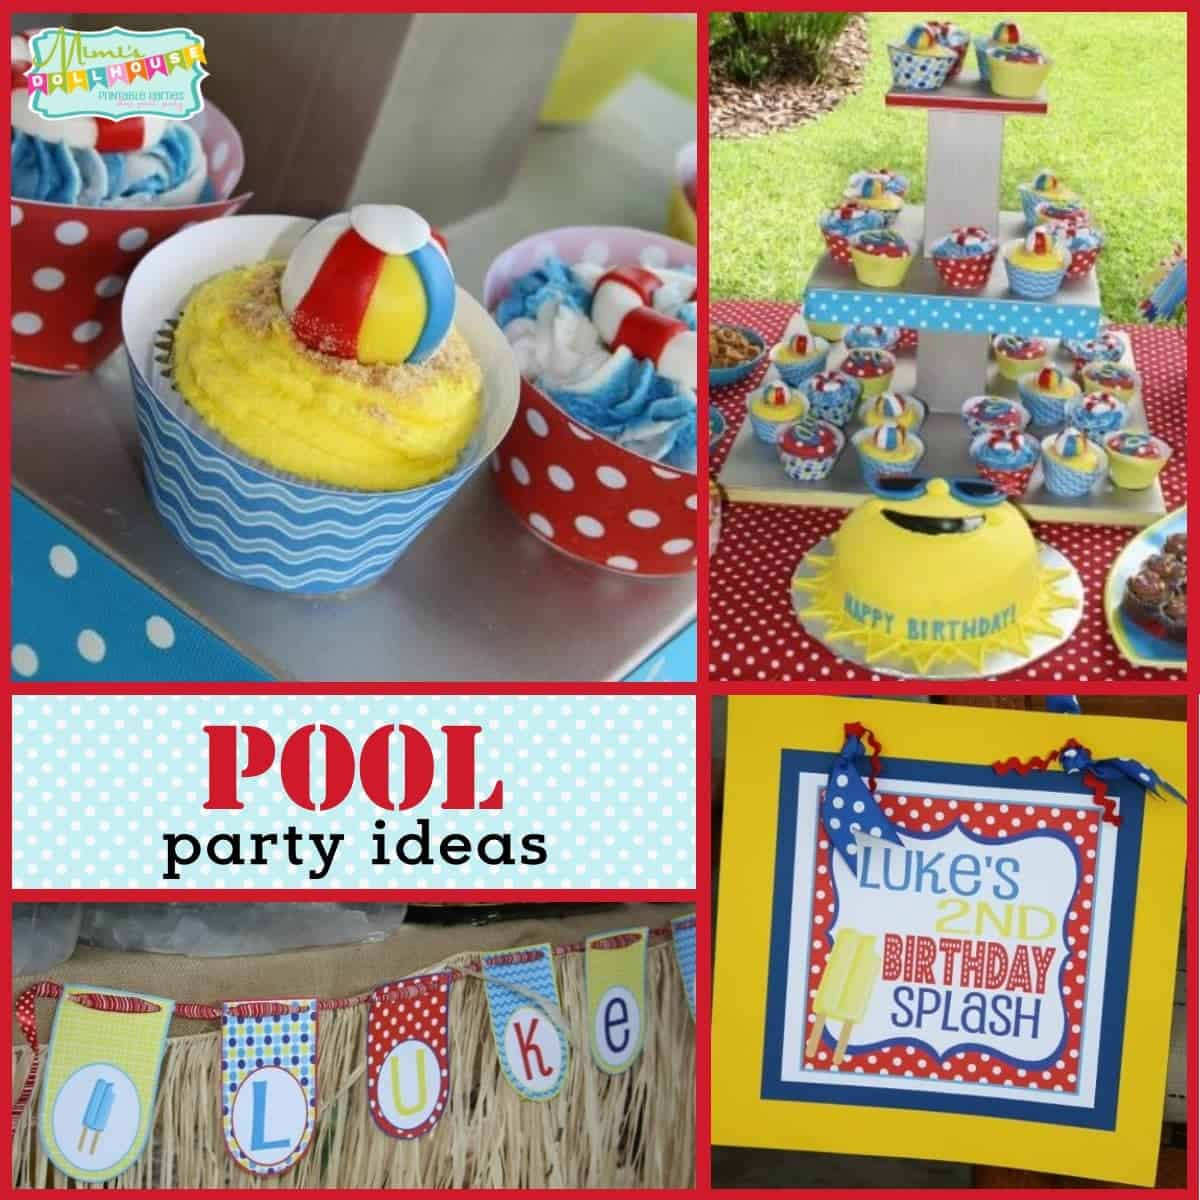 Poolside Party Decoration Ideas
 Pool Party Decorations Luke s Pool Party Birthday Party